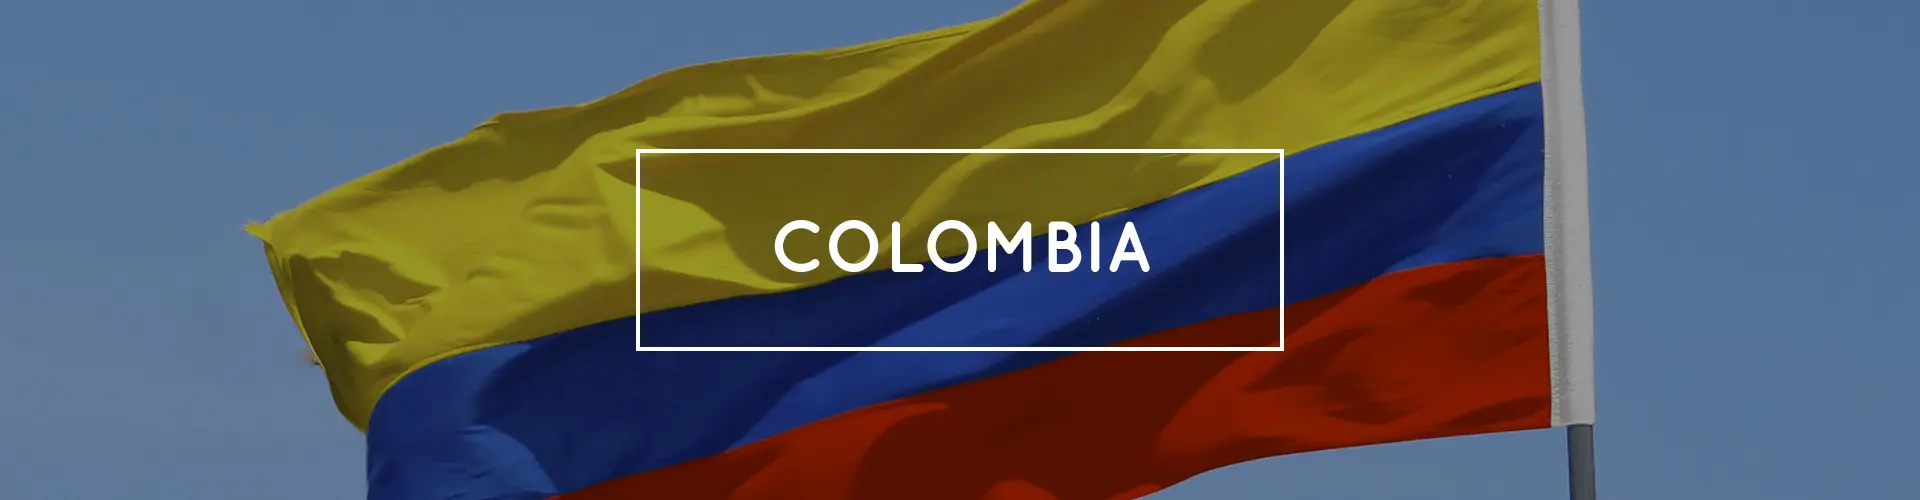 clombia flag